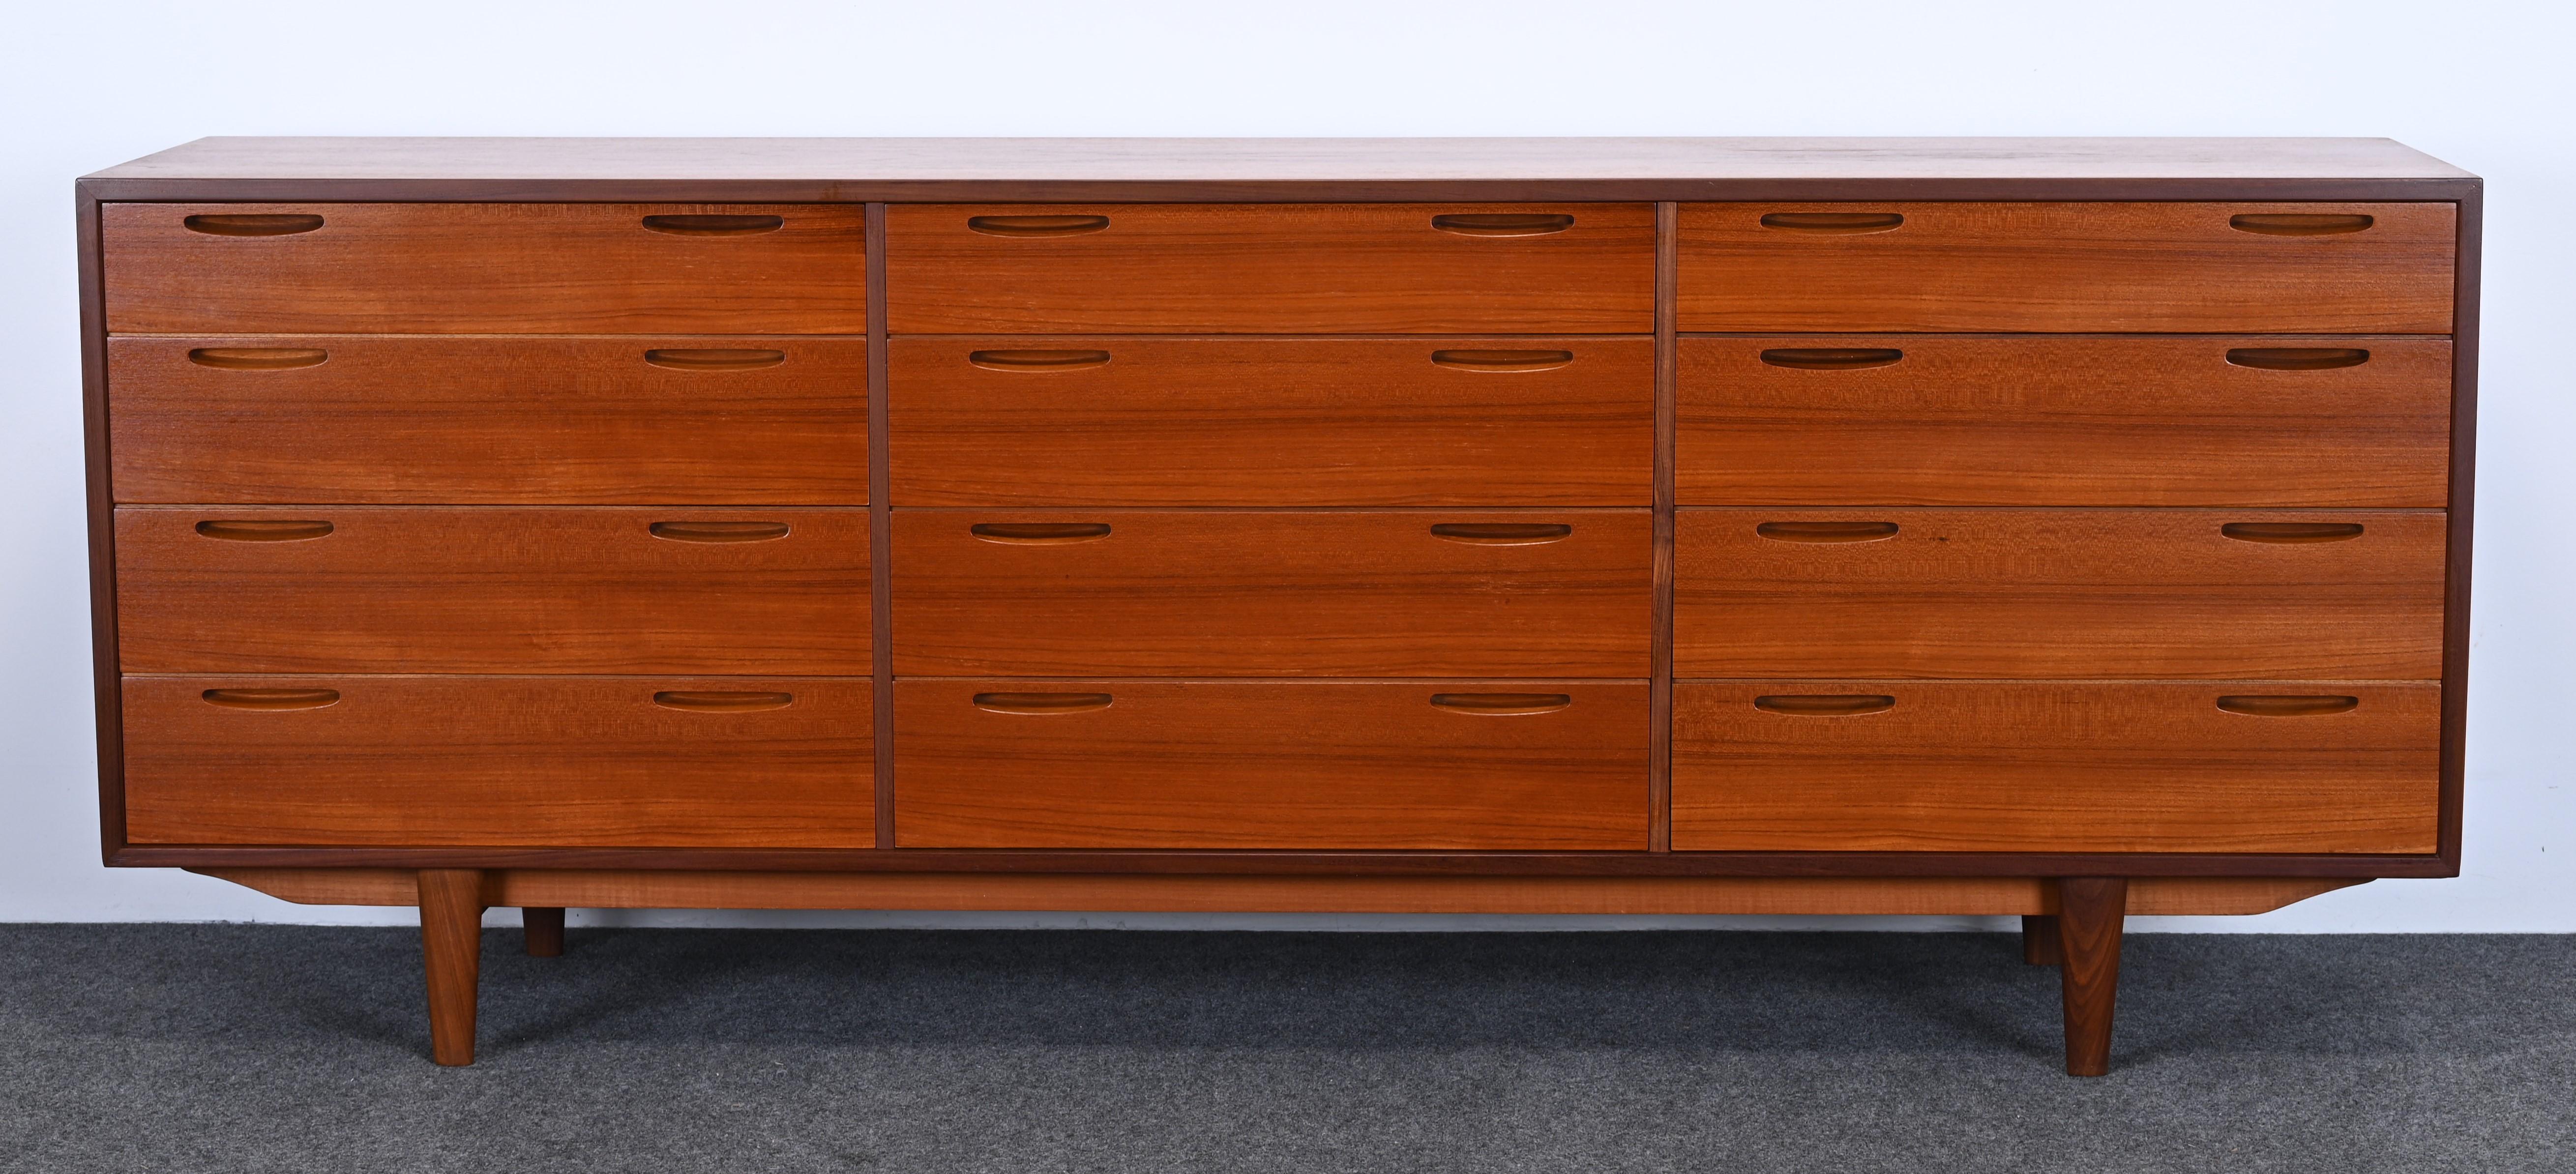 A sleek Mid-Century Modern 12 drawer dresser by Ib Kofod-Larsen. This amazing chest of drawers has style and function. The top surface has been refinished and the base has been top coated. The interior of the drawers is very clean. Slight shadow on